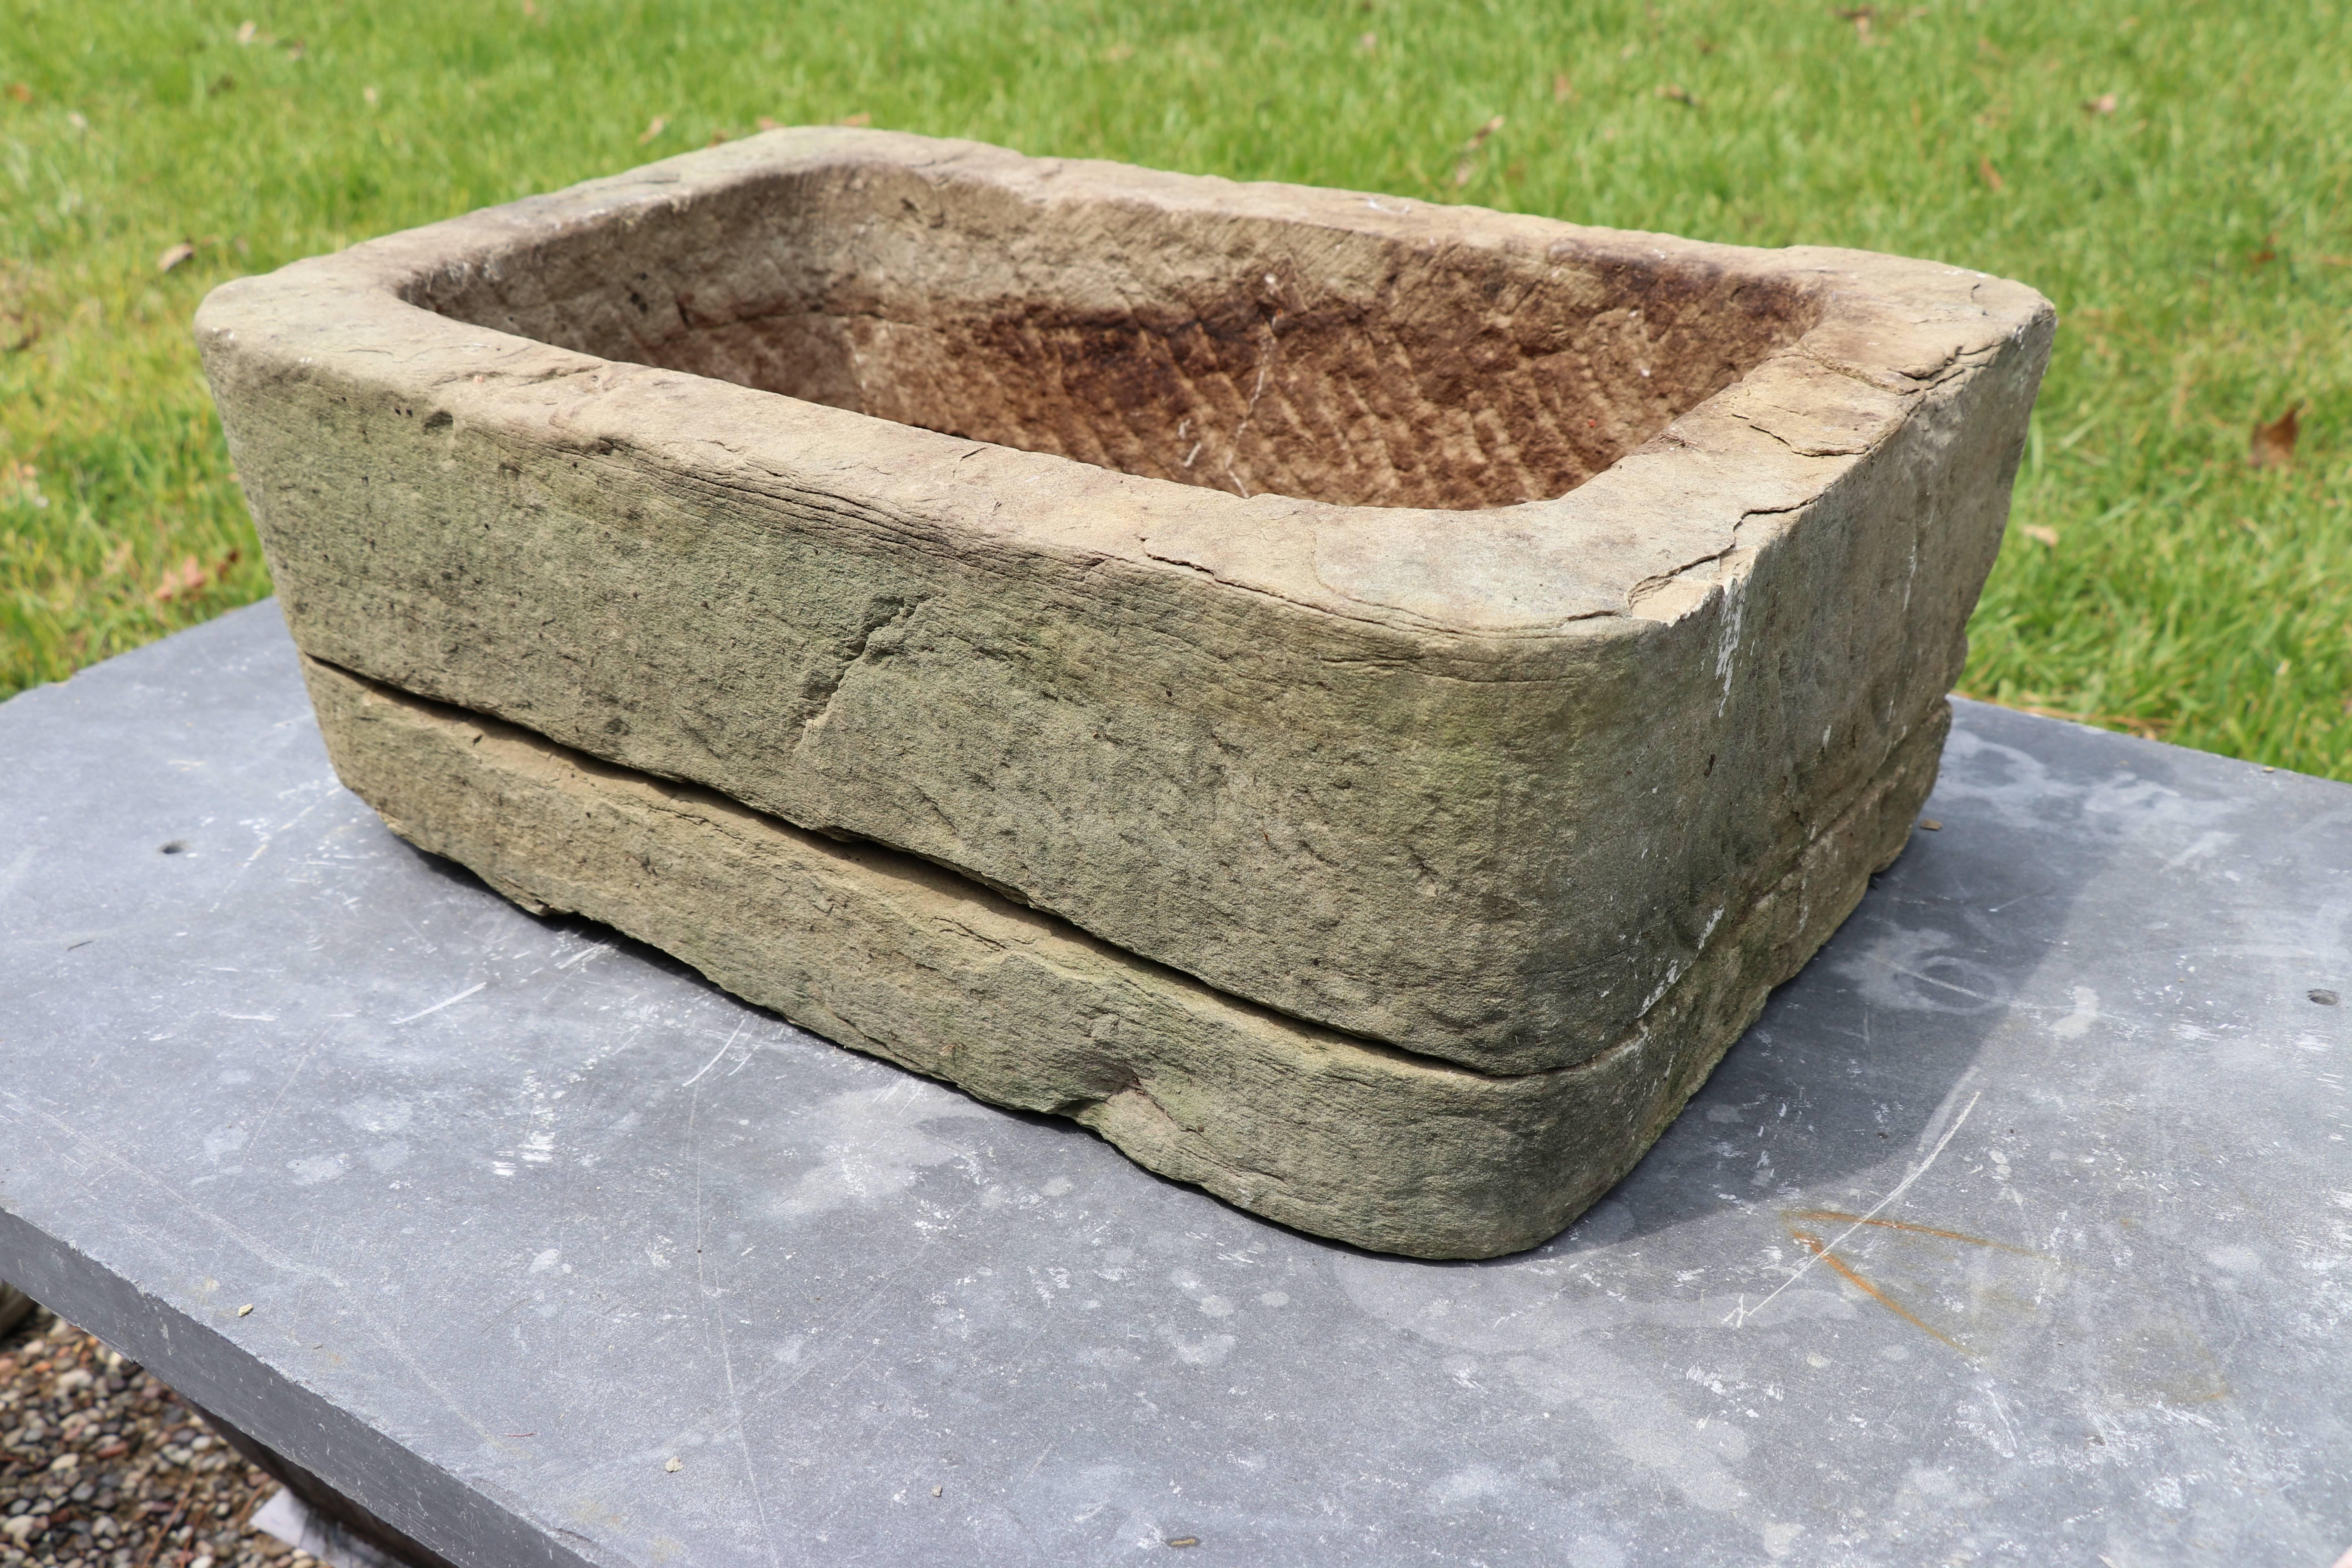 Hand-carved Belgian stone planter (circa 1900): rectangular in shape, this limestone, or bluestone, is comprised of two pieces. Top portion fits snugly on the bottom slab. Item is not meant to be a vessel for holding water.